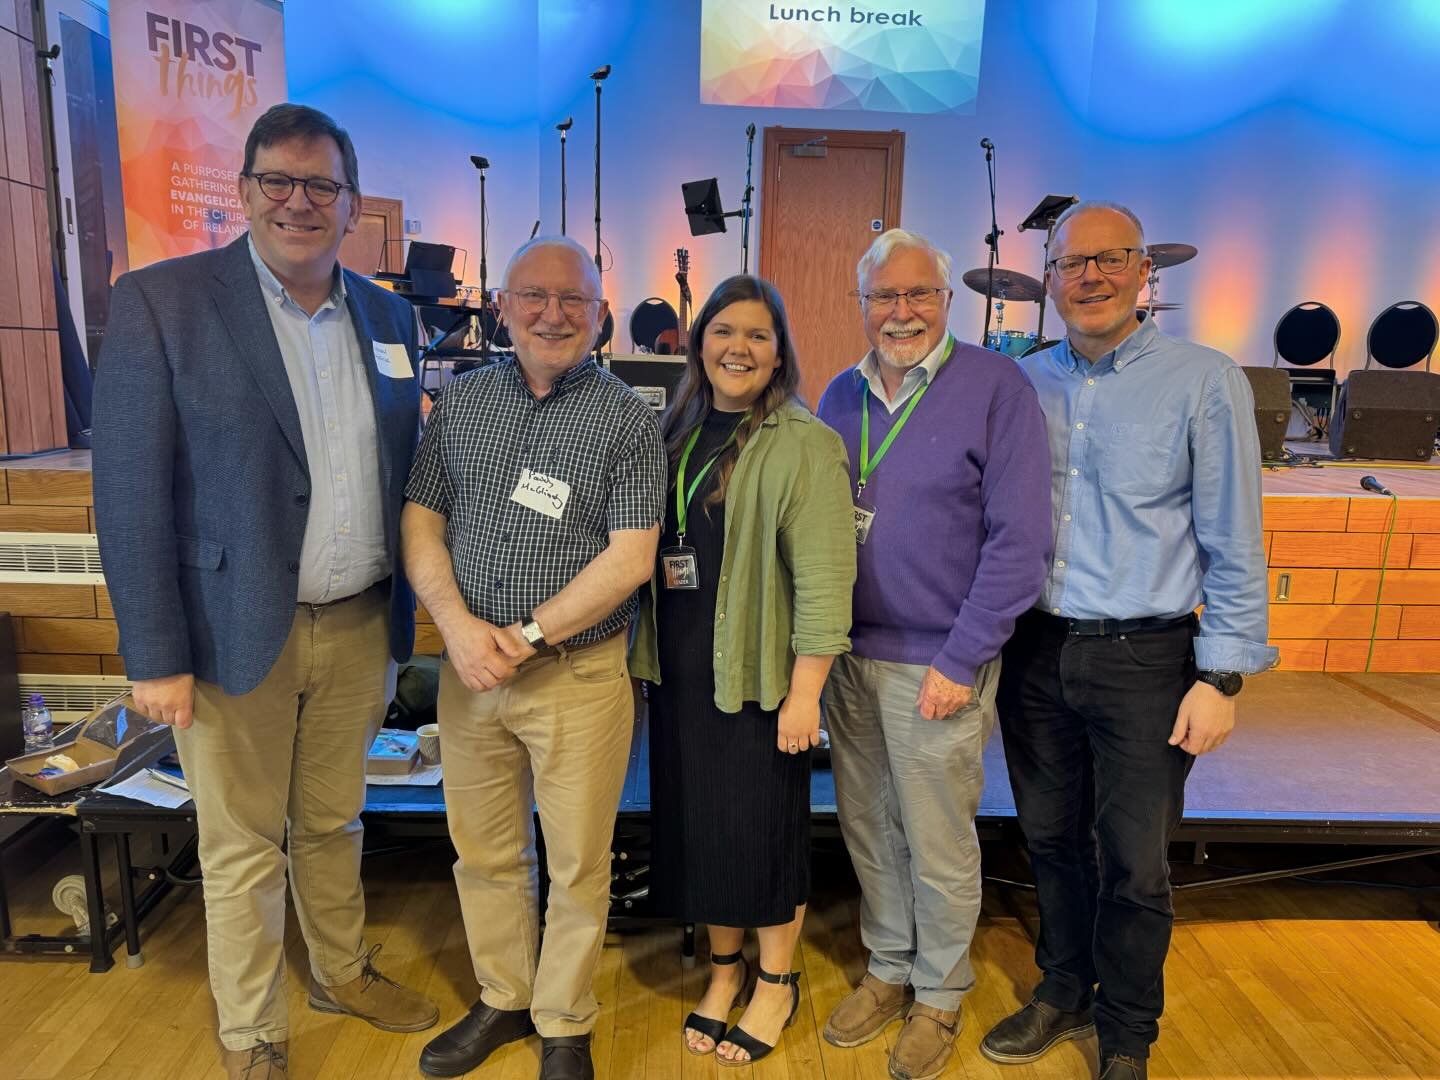 Today, the current chaplain of The Hub, Danielle,  met with four former Hub chaplains at the First Things conference - Bishop Andrew Forster, Rev Dr. Paddy McGlinchy, Bishop Harold Miller &amp; Archdeacon Barry Forde.

The ministry of the first of th